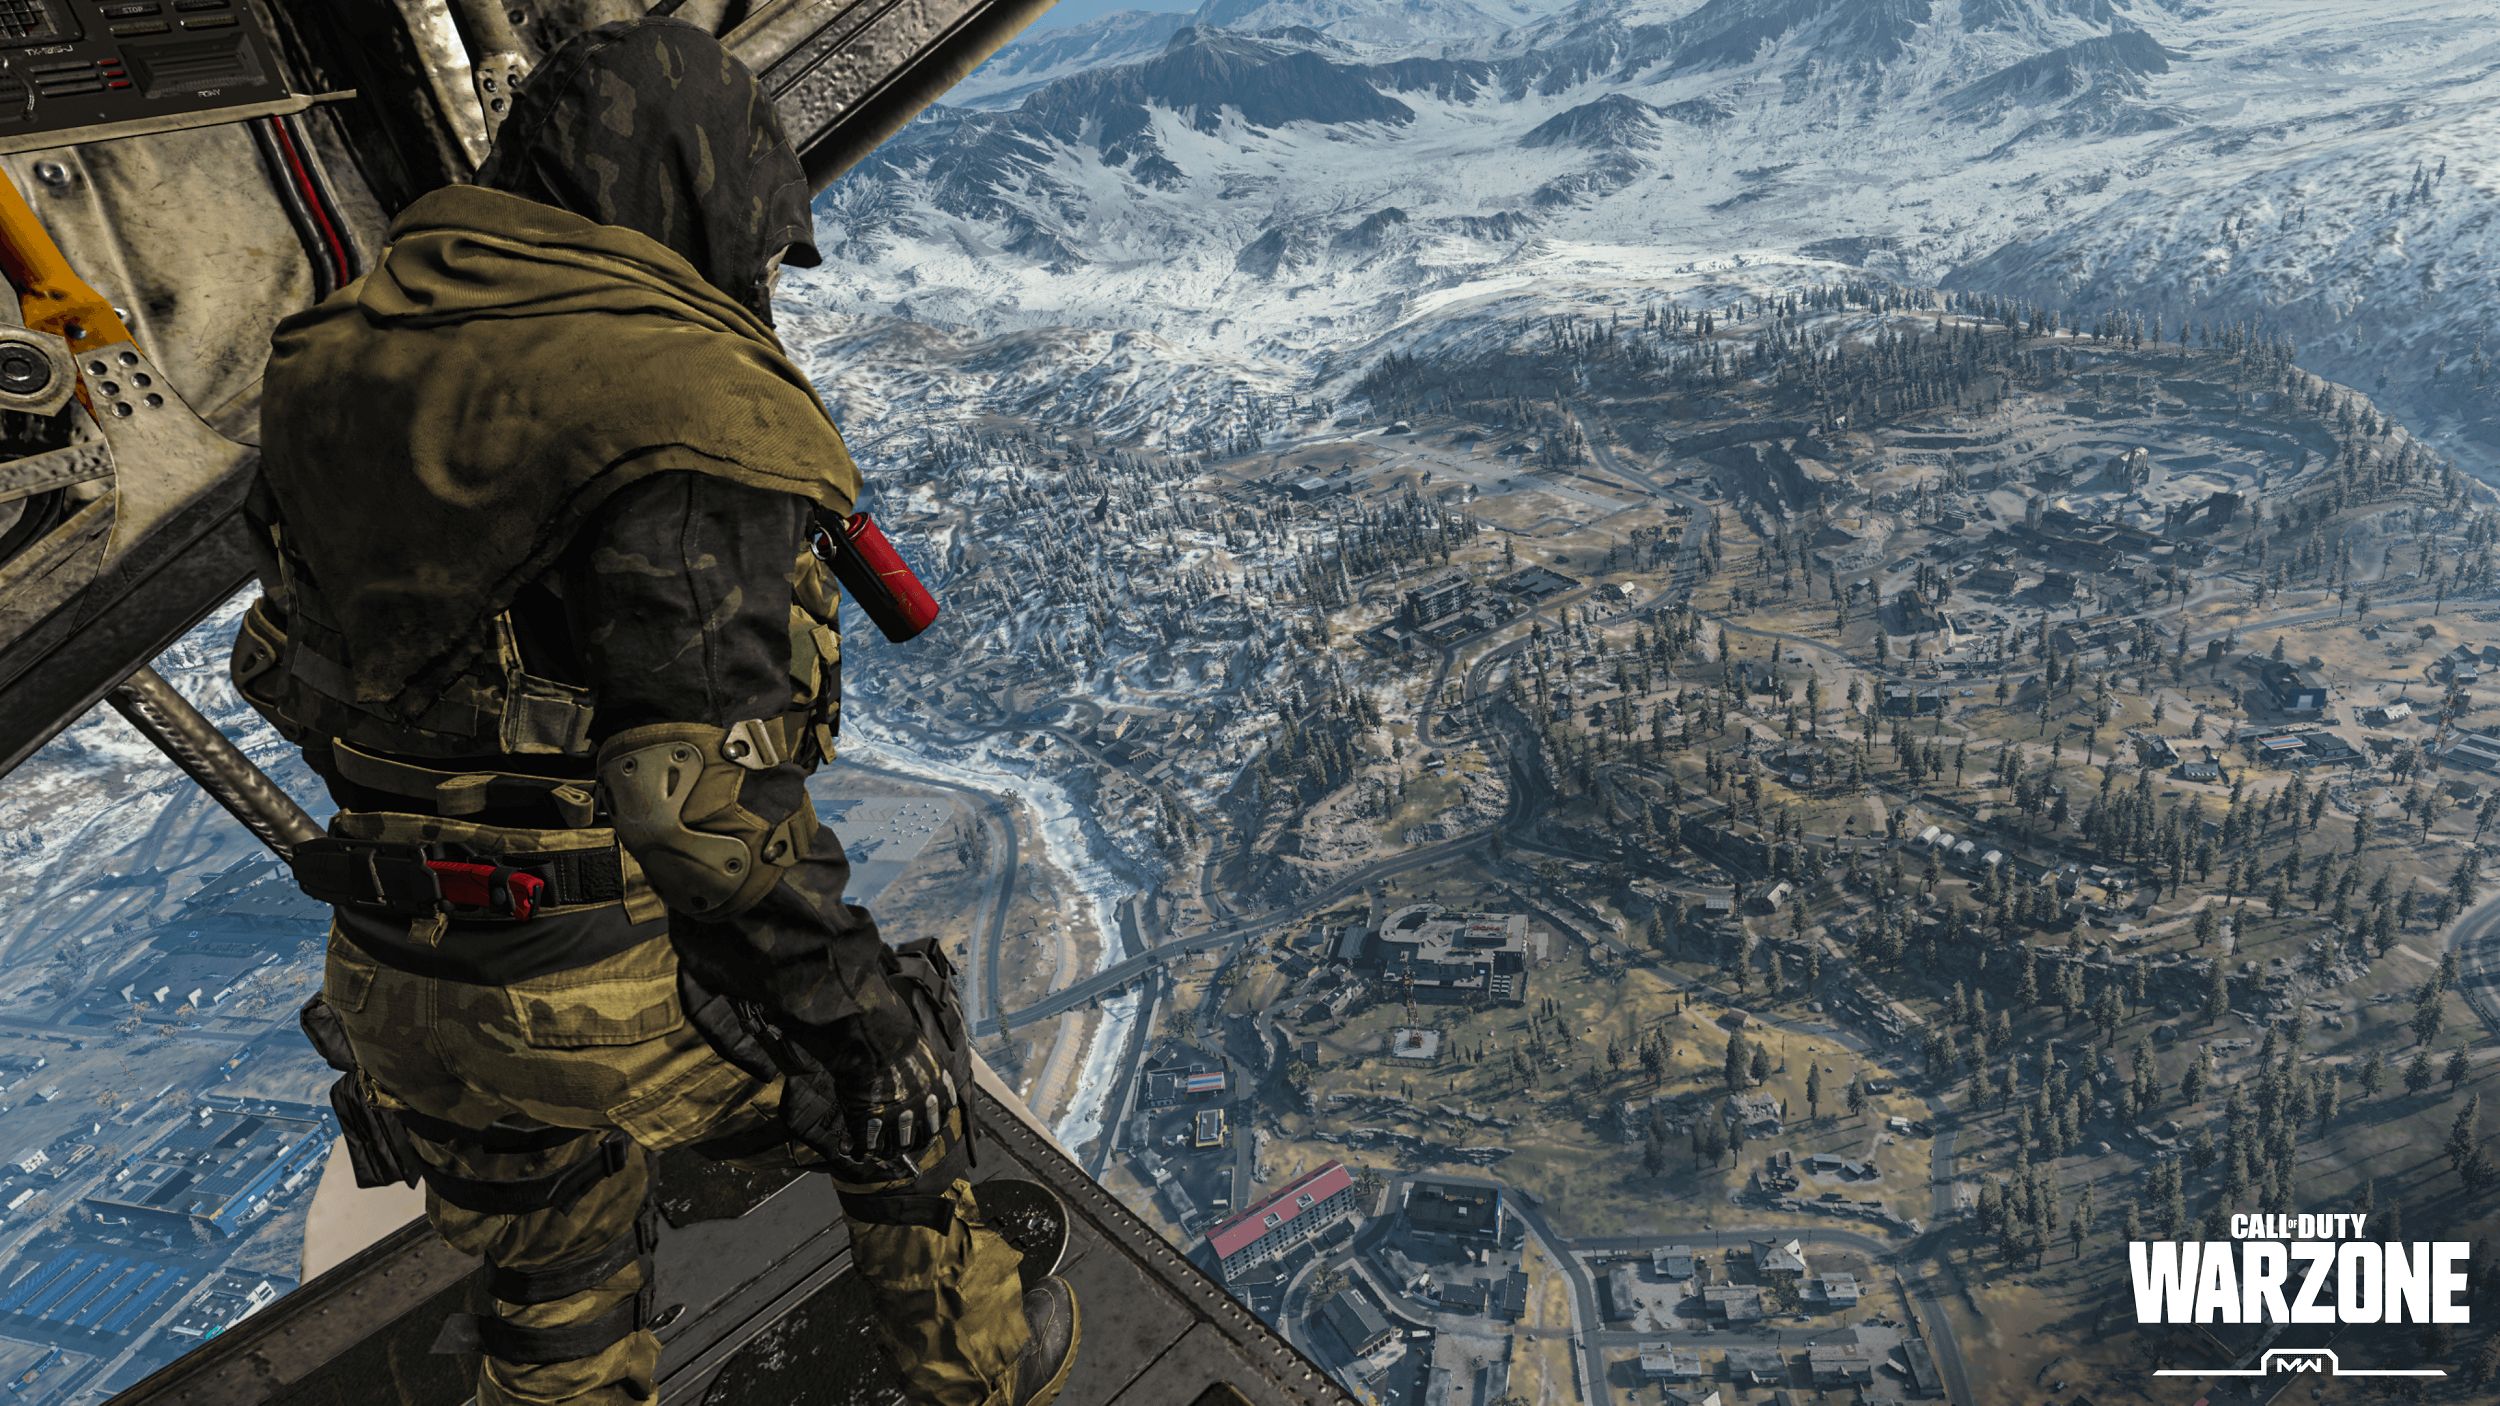 Call Of Duty Warzone New Cold War Map Update Due In April Rumors Claim